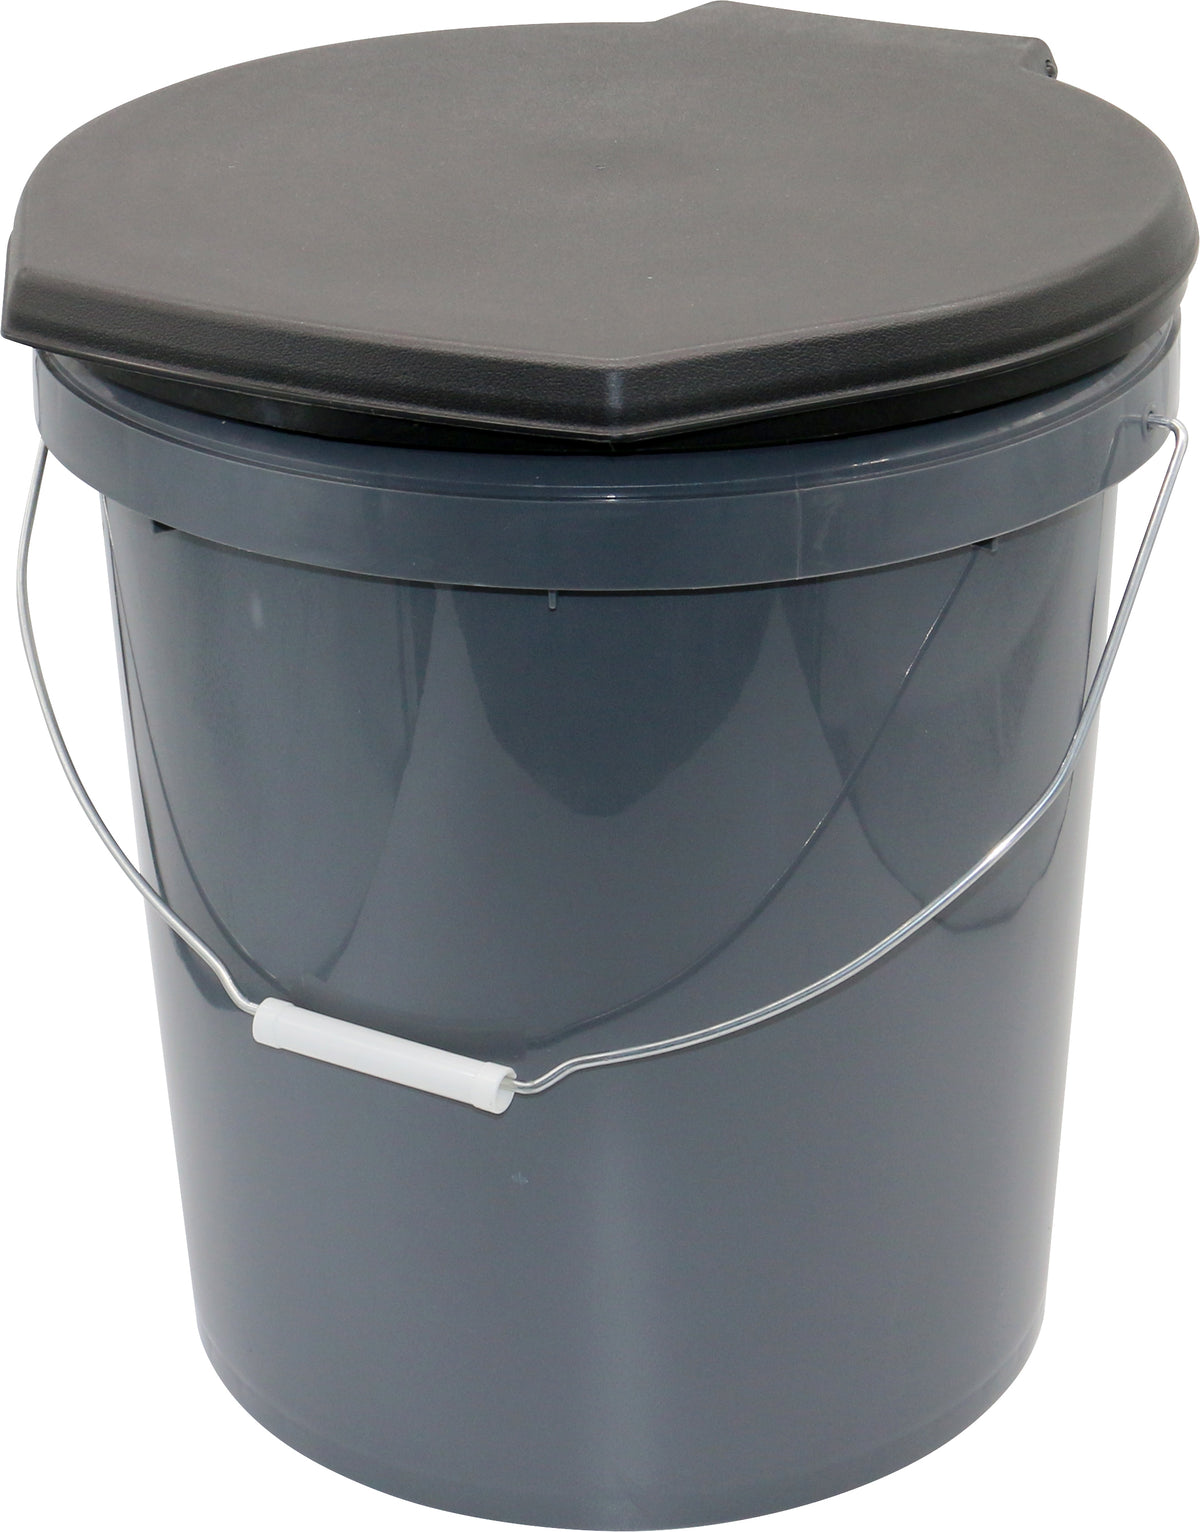 TRAVEL TOILET 20L BUCKET WITH LID SEAT